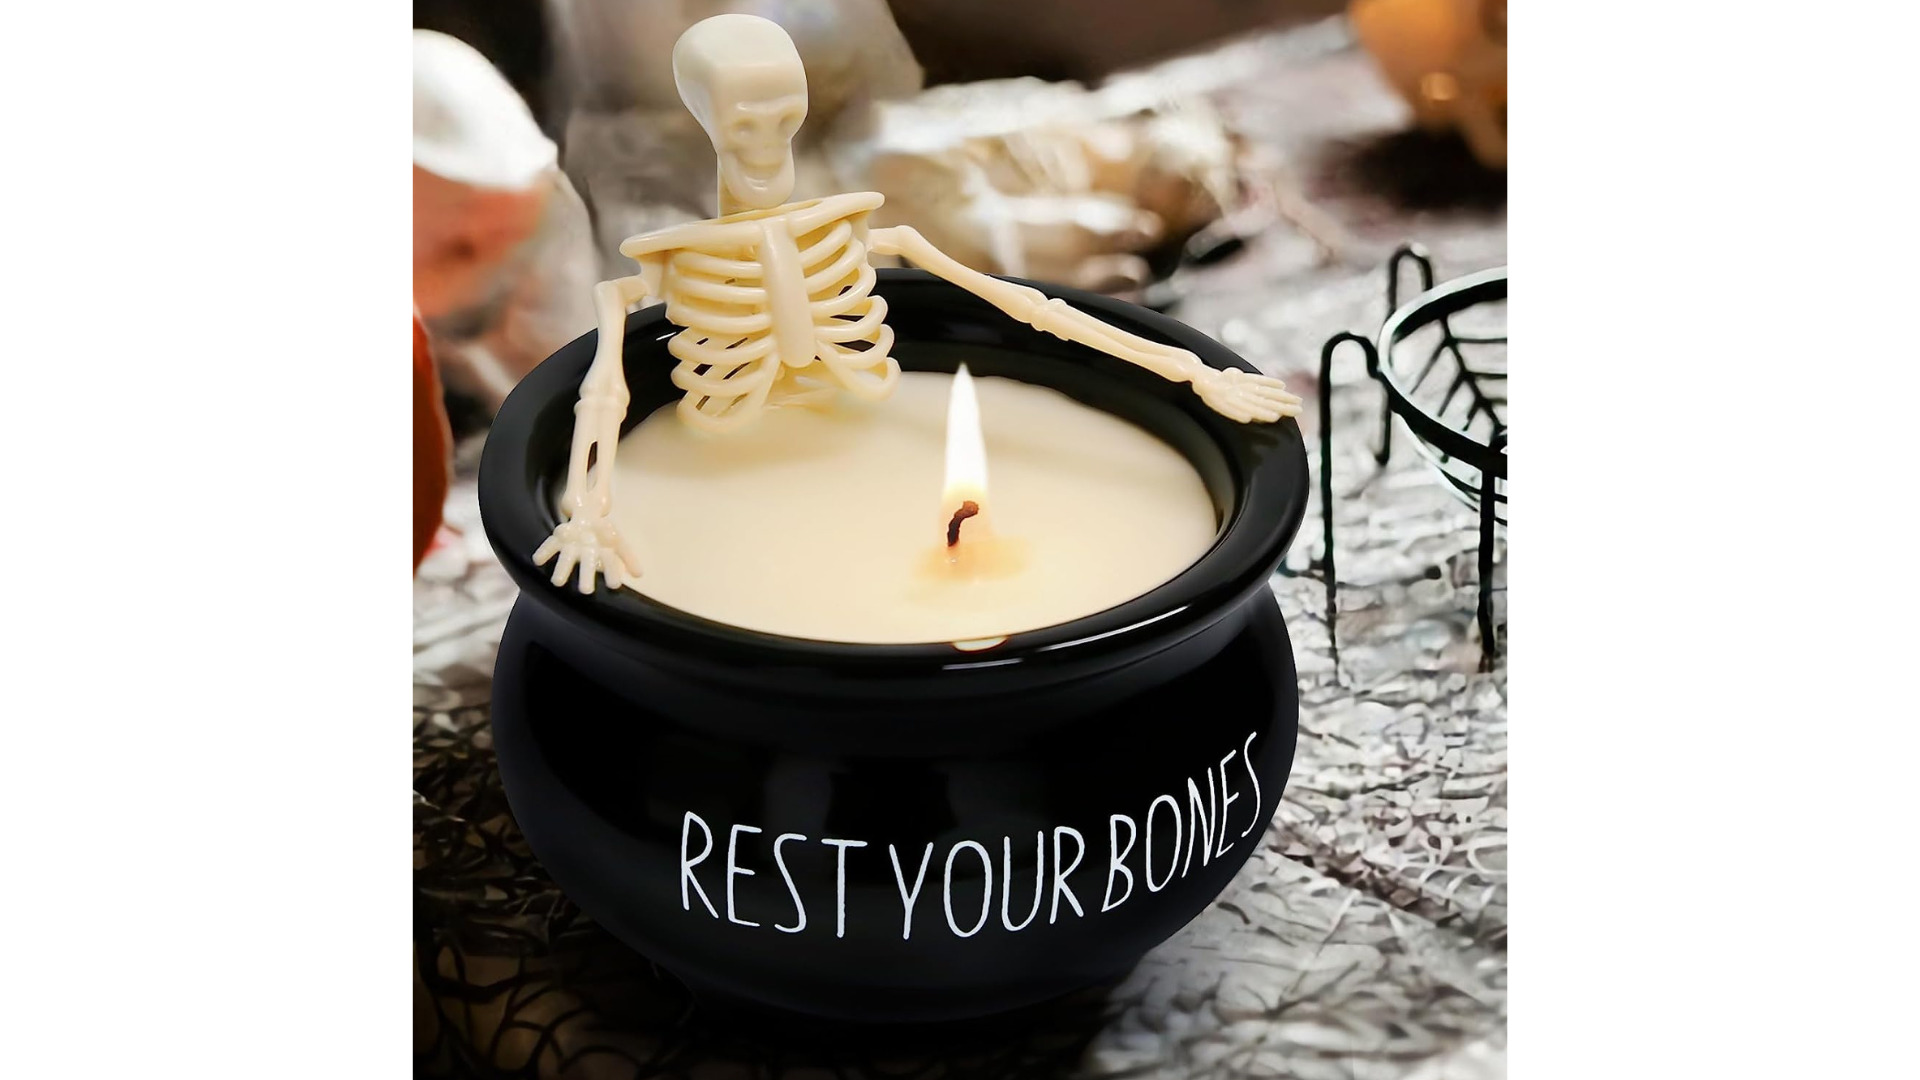 Chilling skeleton candle for halloween gift